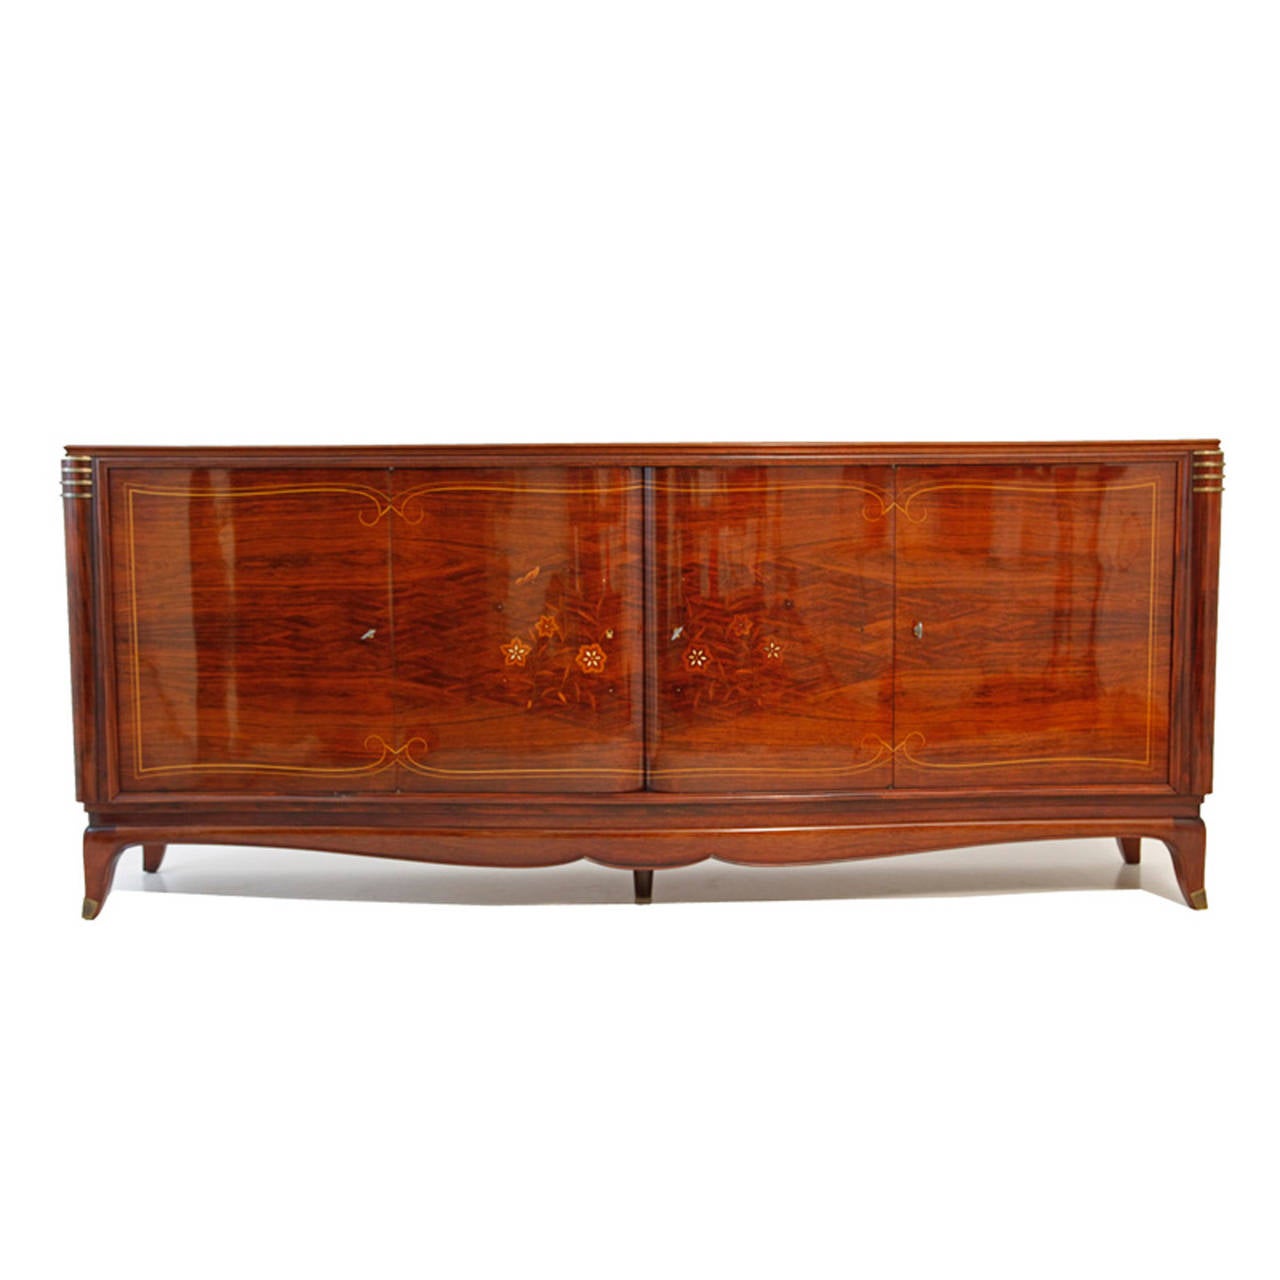 Sideboard in the style of Leleu, dating from the 1920s.